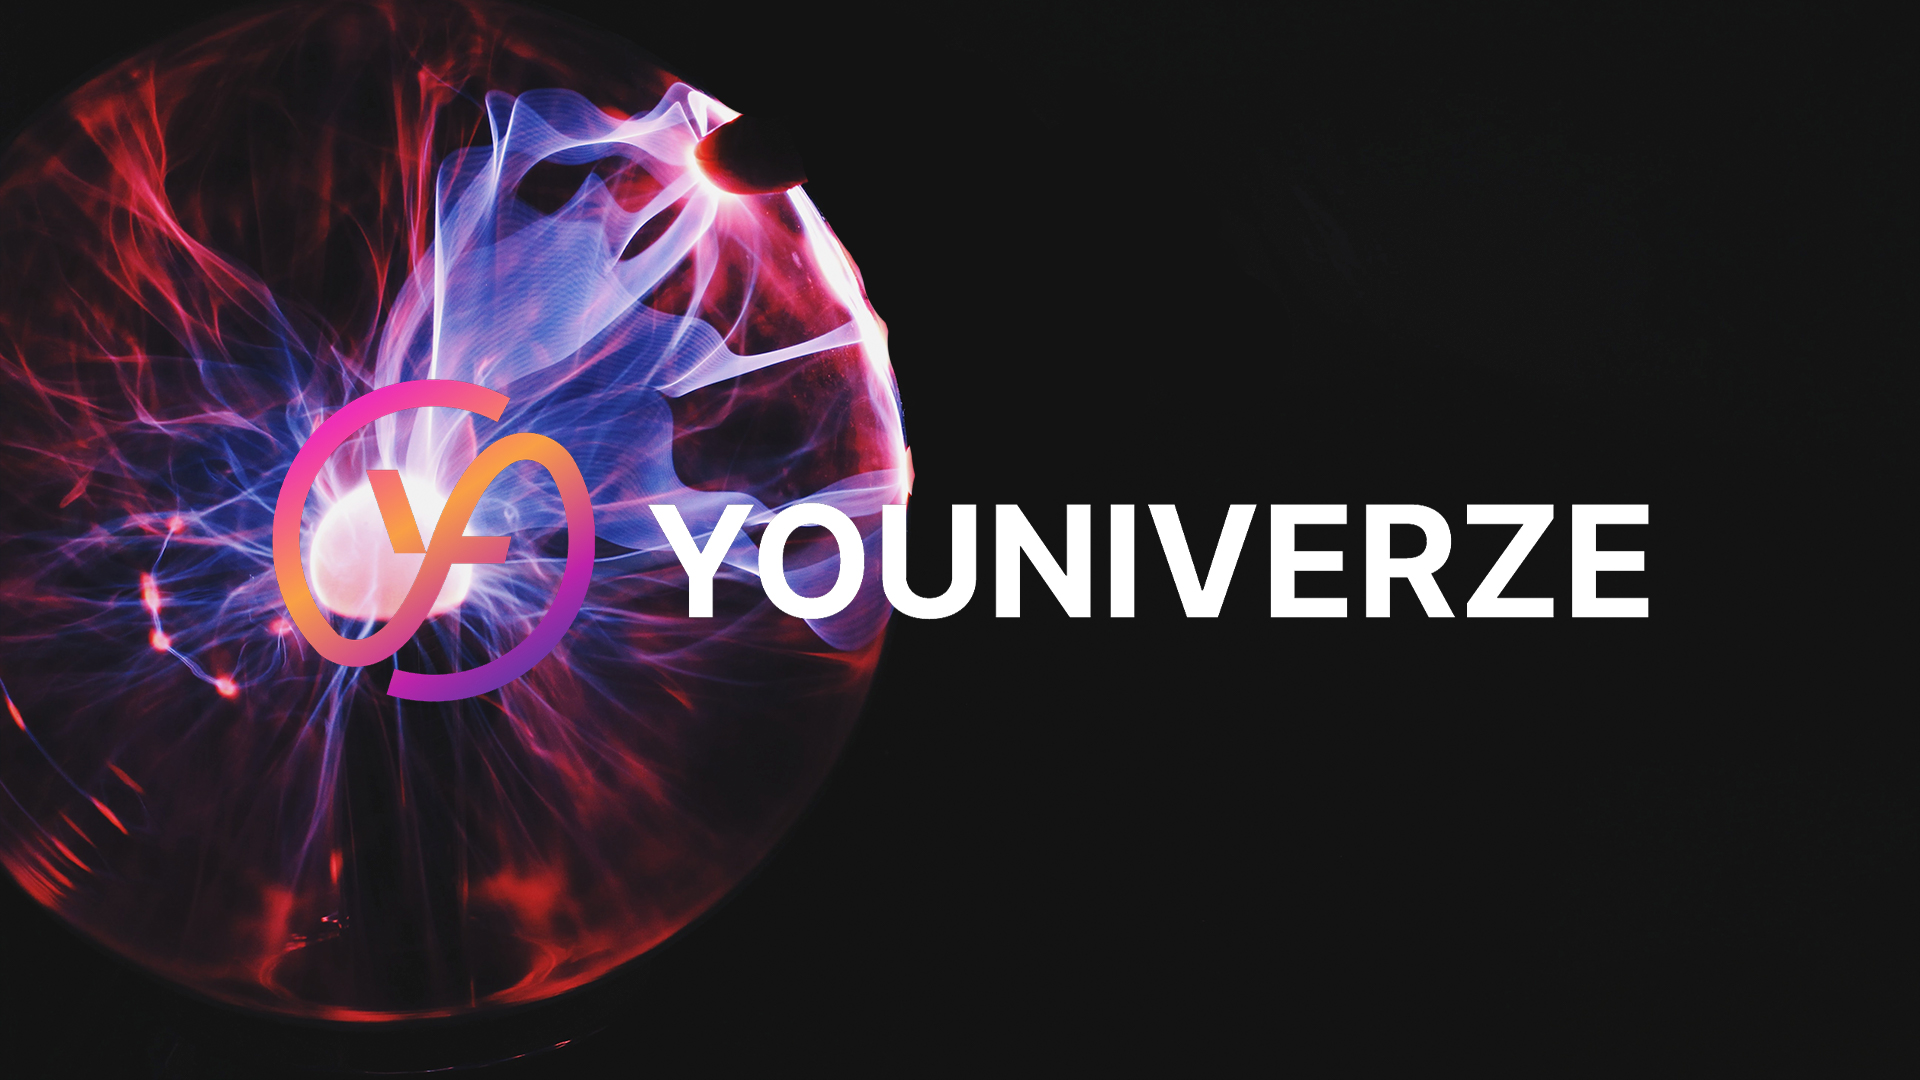 Youniverze Finance (YUNI), Binance Coin (BNB), Convex Finance (CVX) - DeFi Tools and Cryptocurrency Exchanges That Solve Interoperability Problems = The Bit Journal